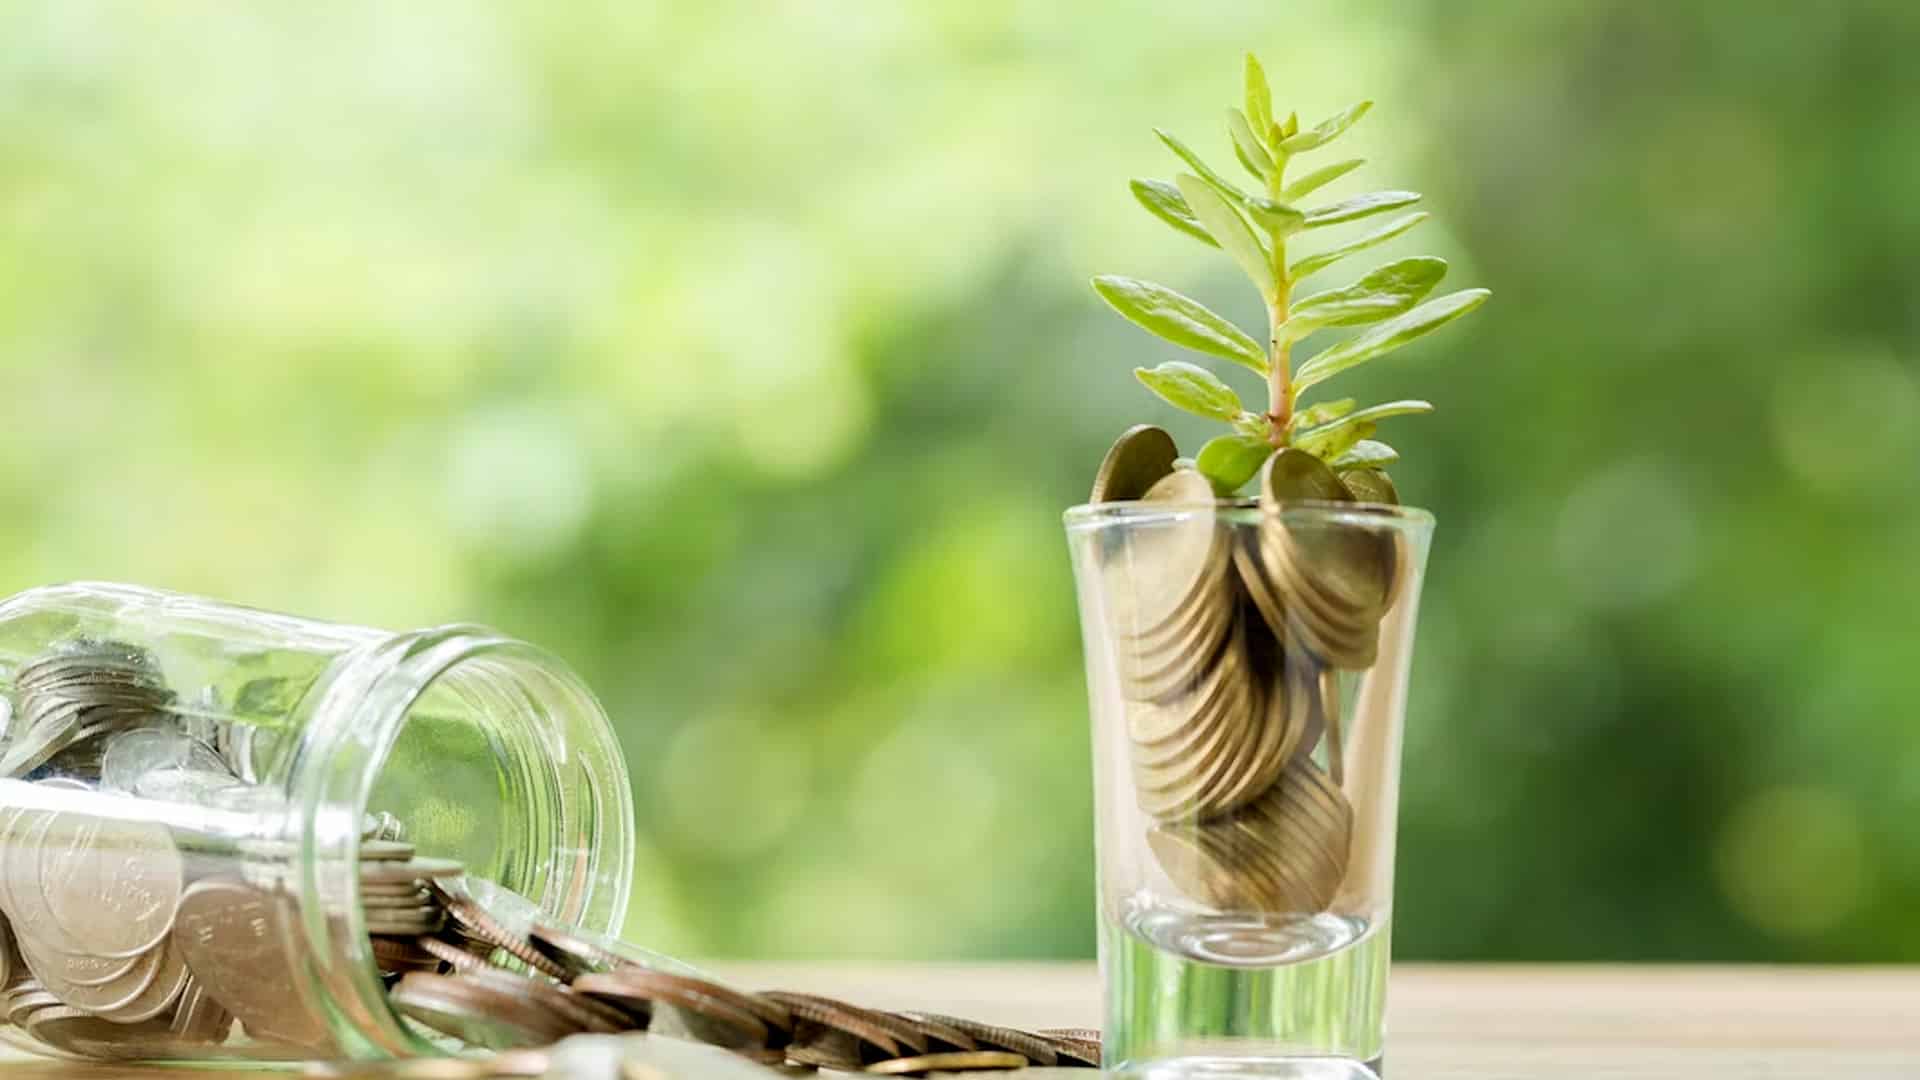 Student Run Startup GreenGrahi Raises Pre-Seed Funding from Campus Fund